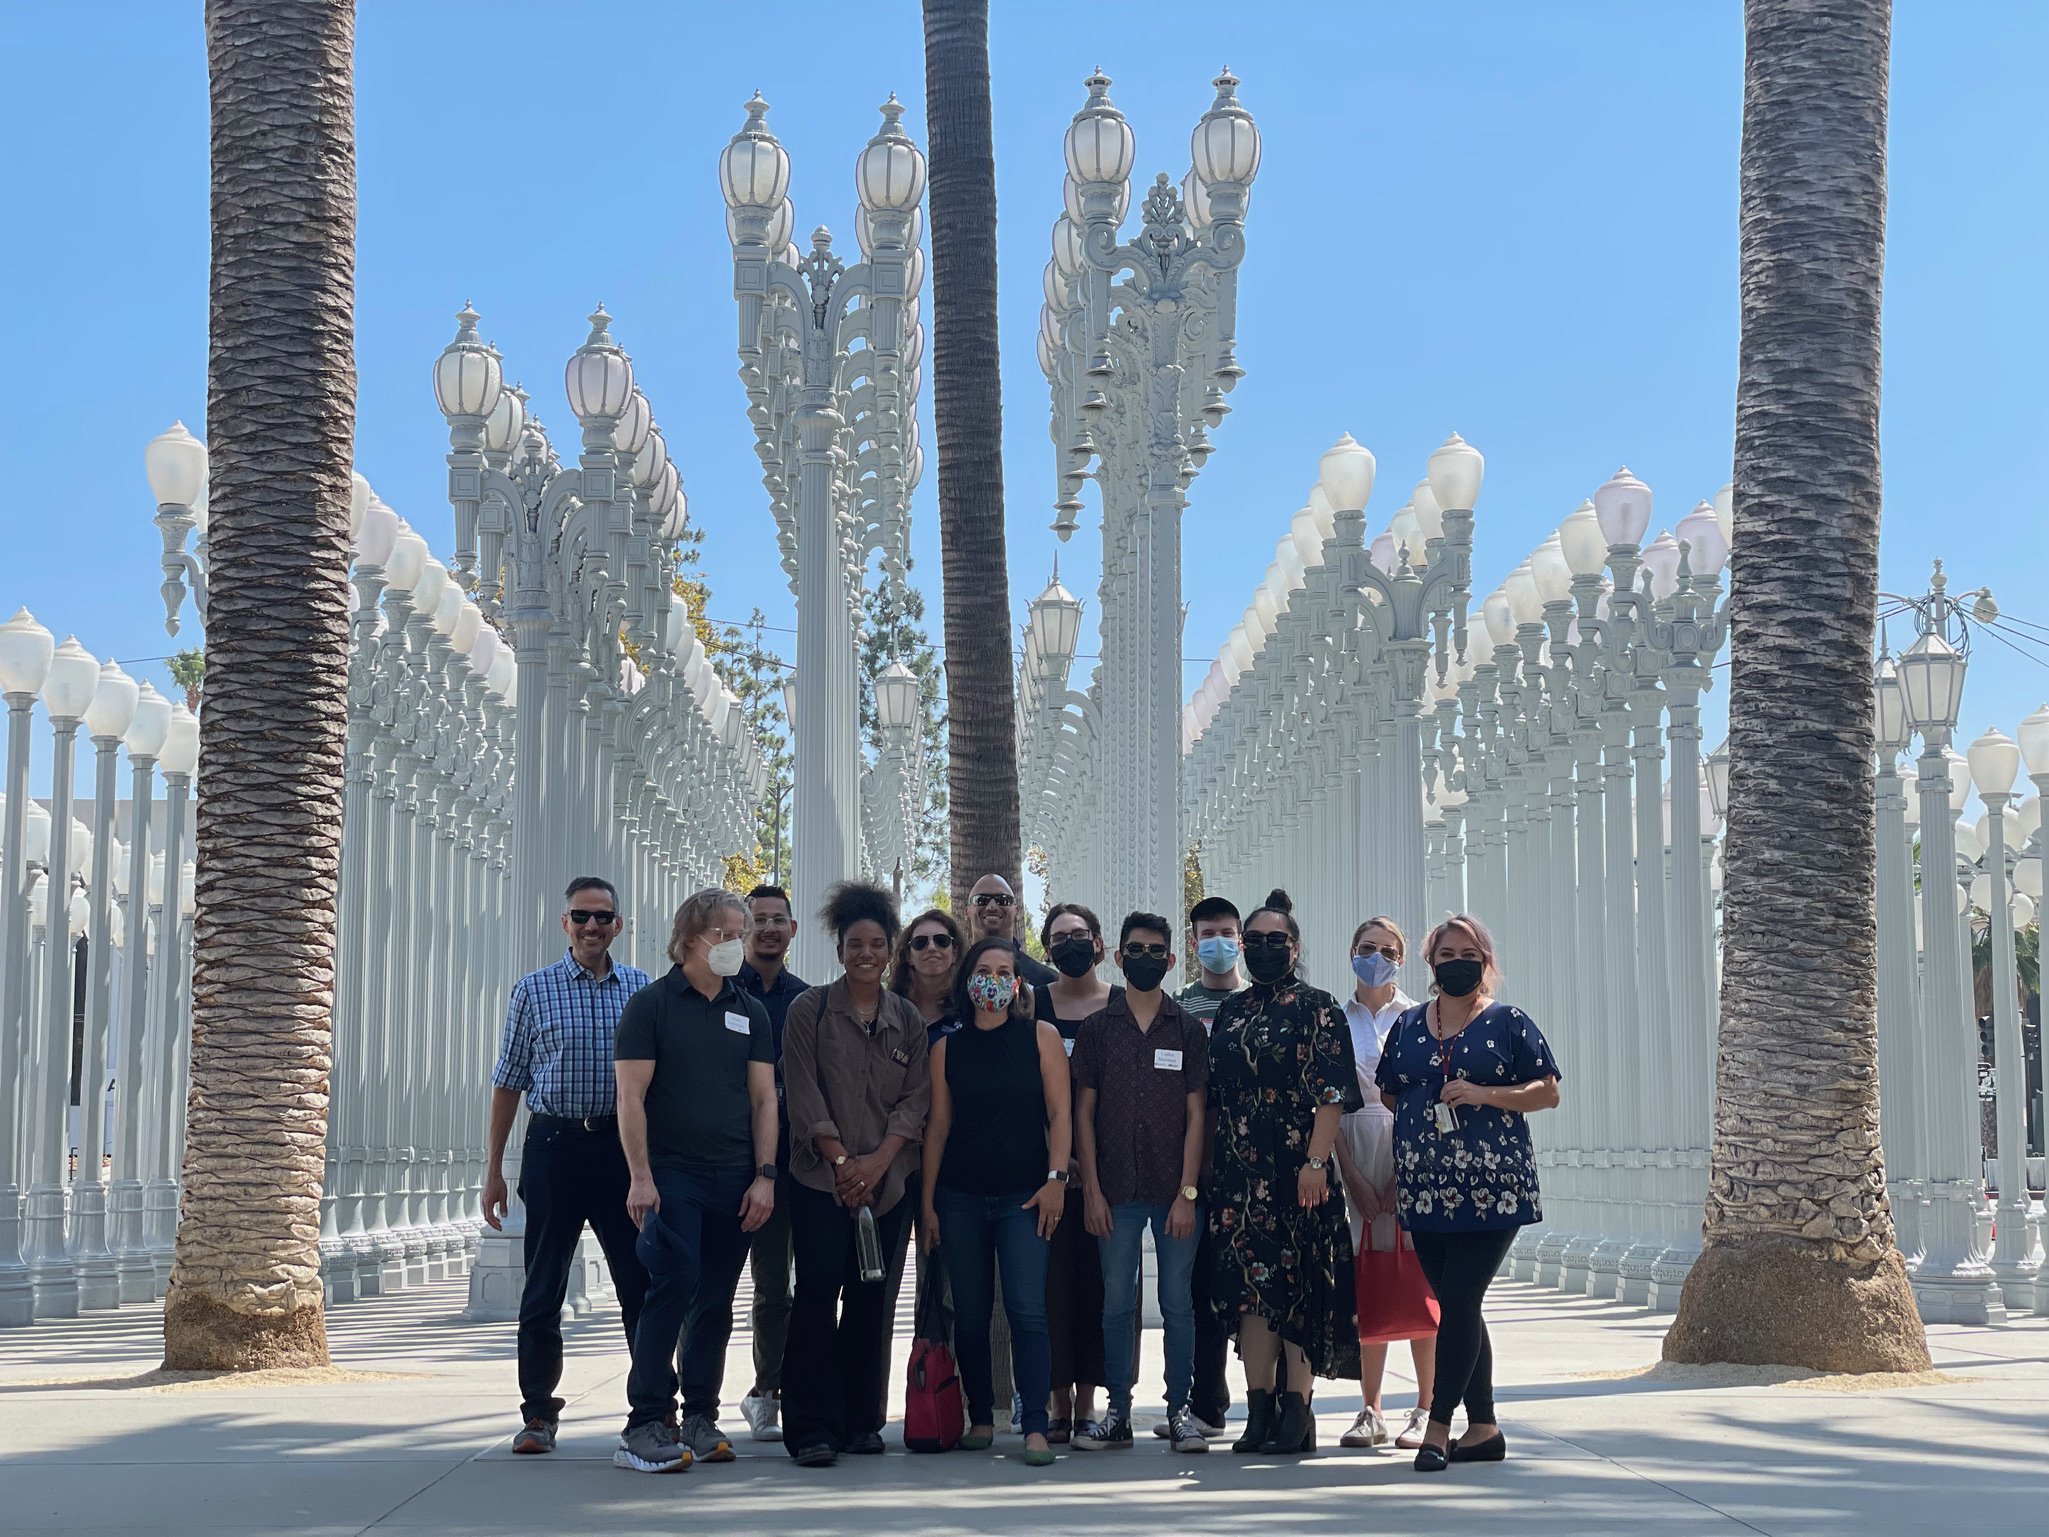 ASU graduate students pose for a group photo outside of the Los Angeles County Museum of Art.